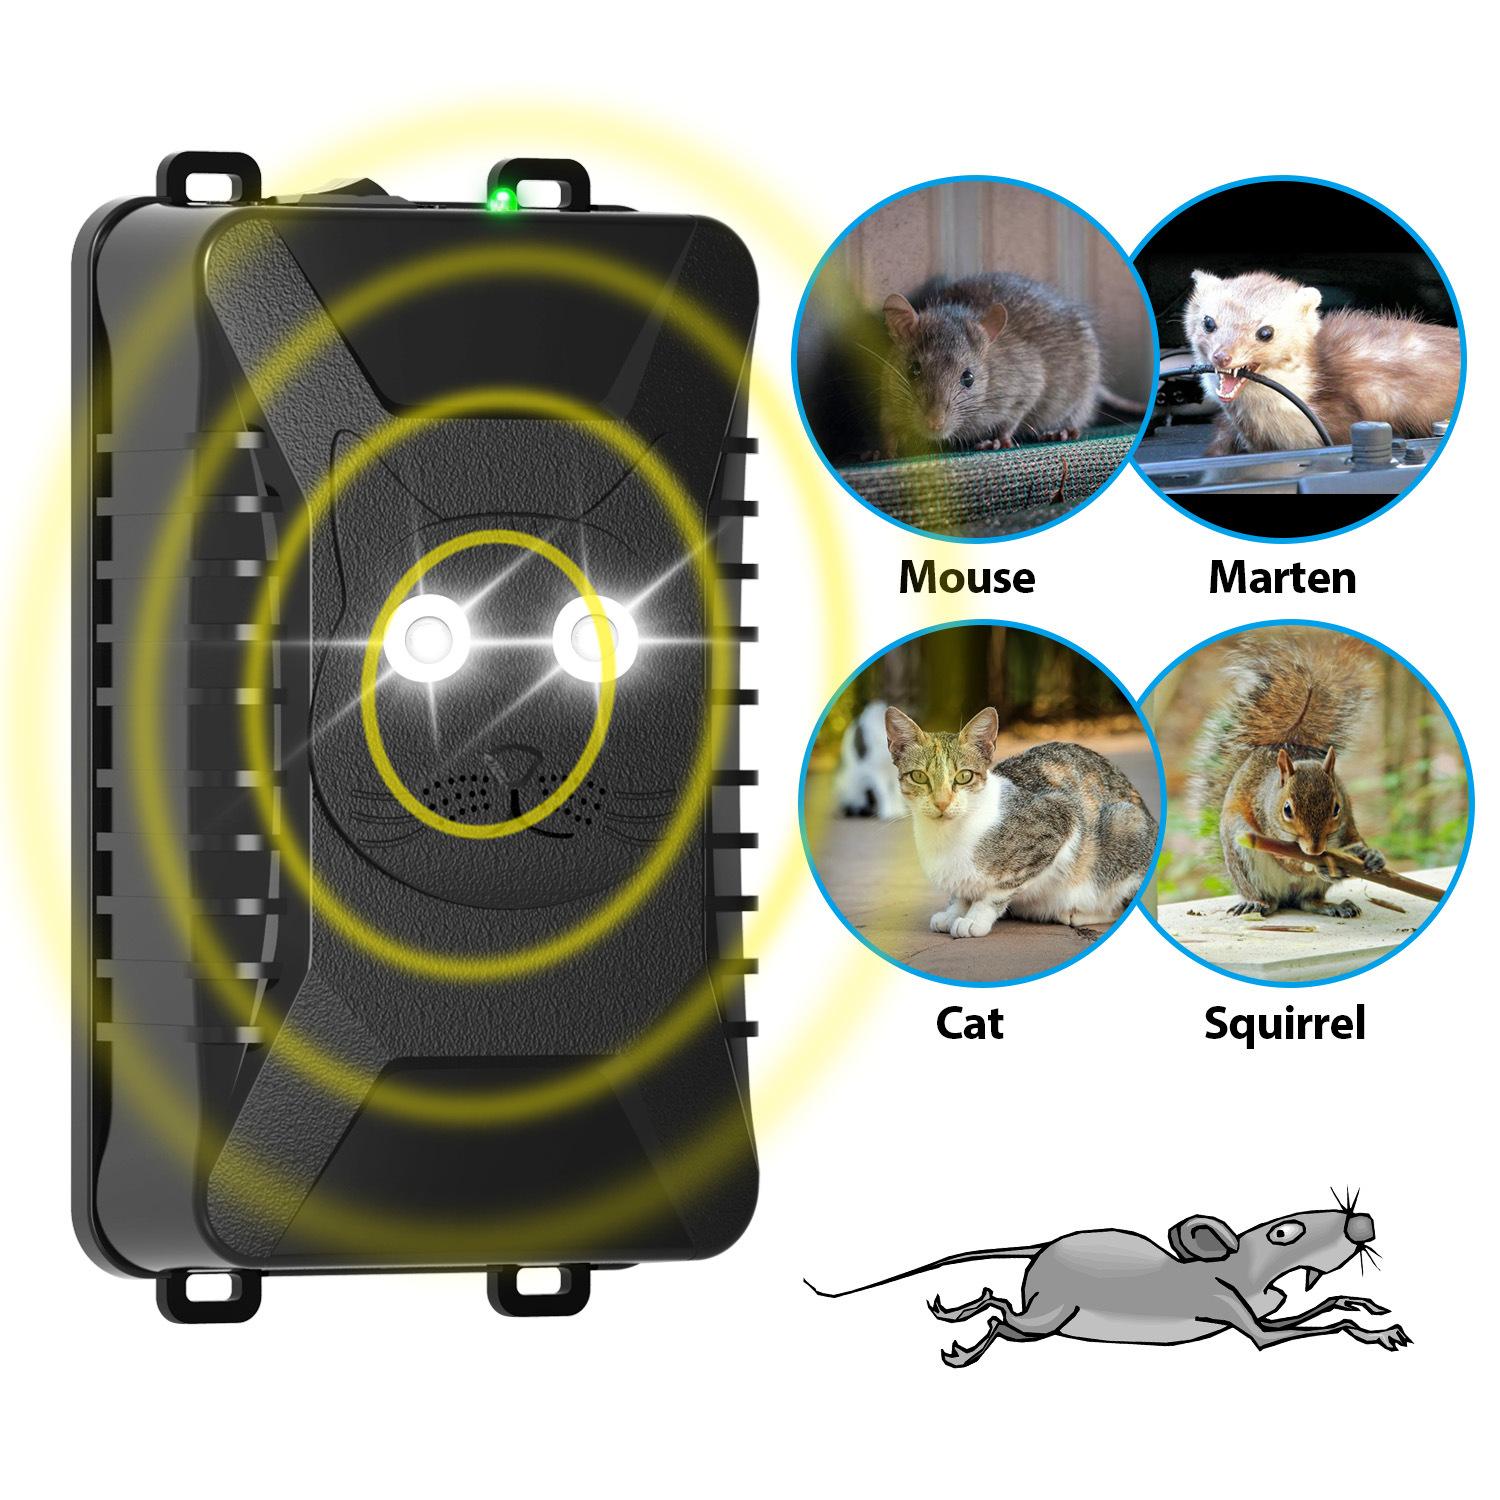 New Automatic Mouse Trap: A Game-Changer for Pest Control